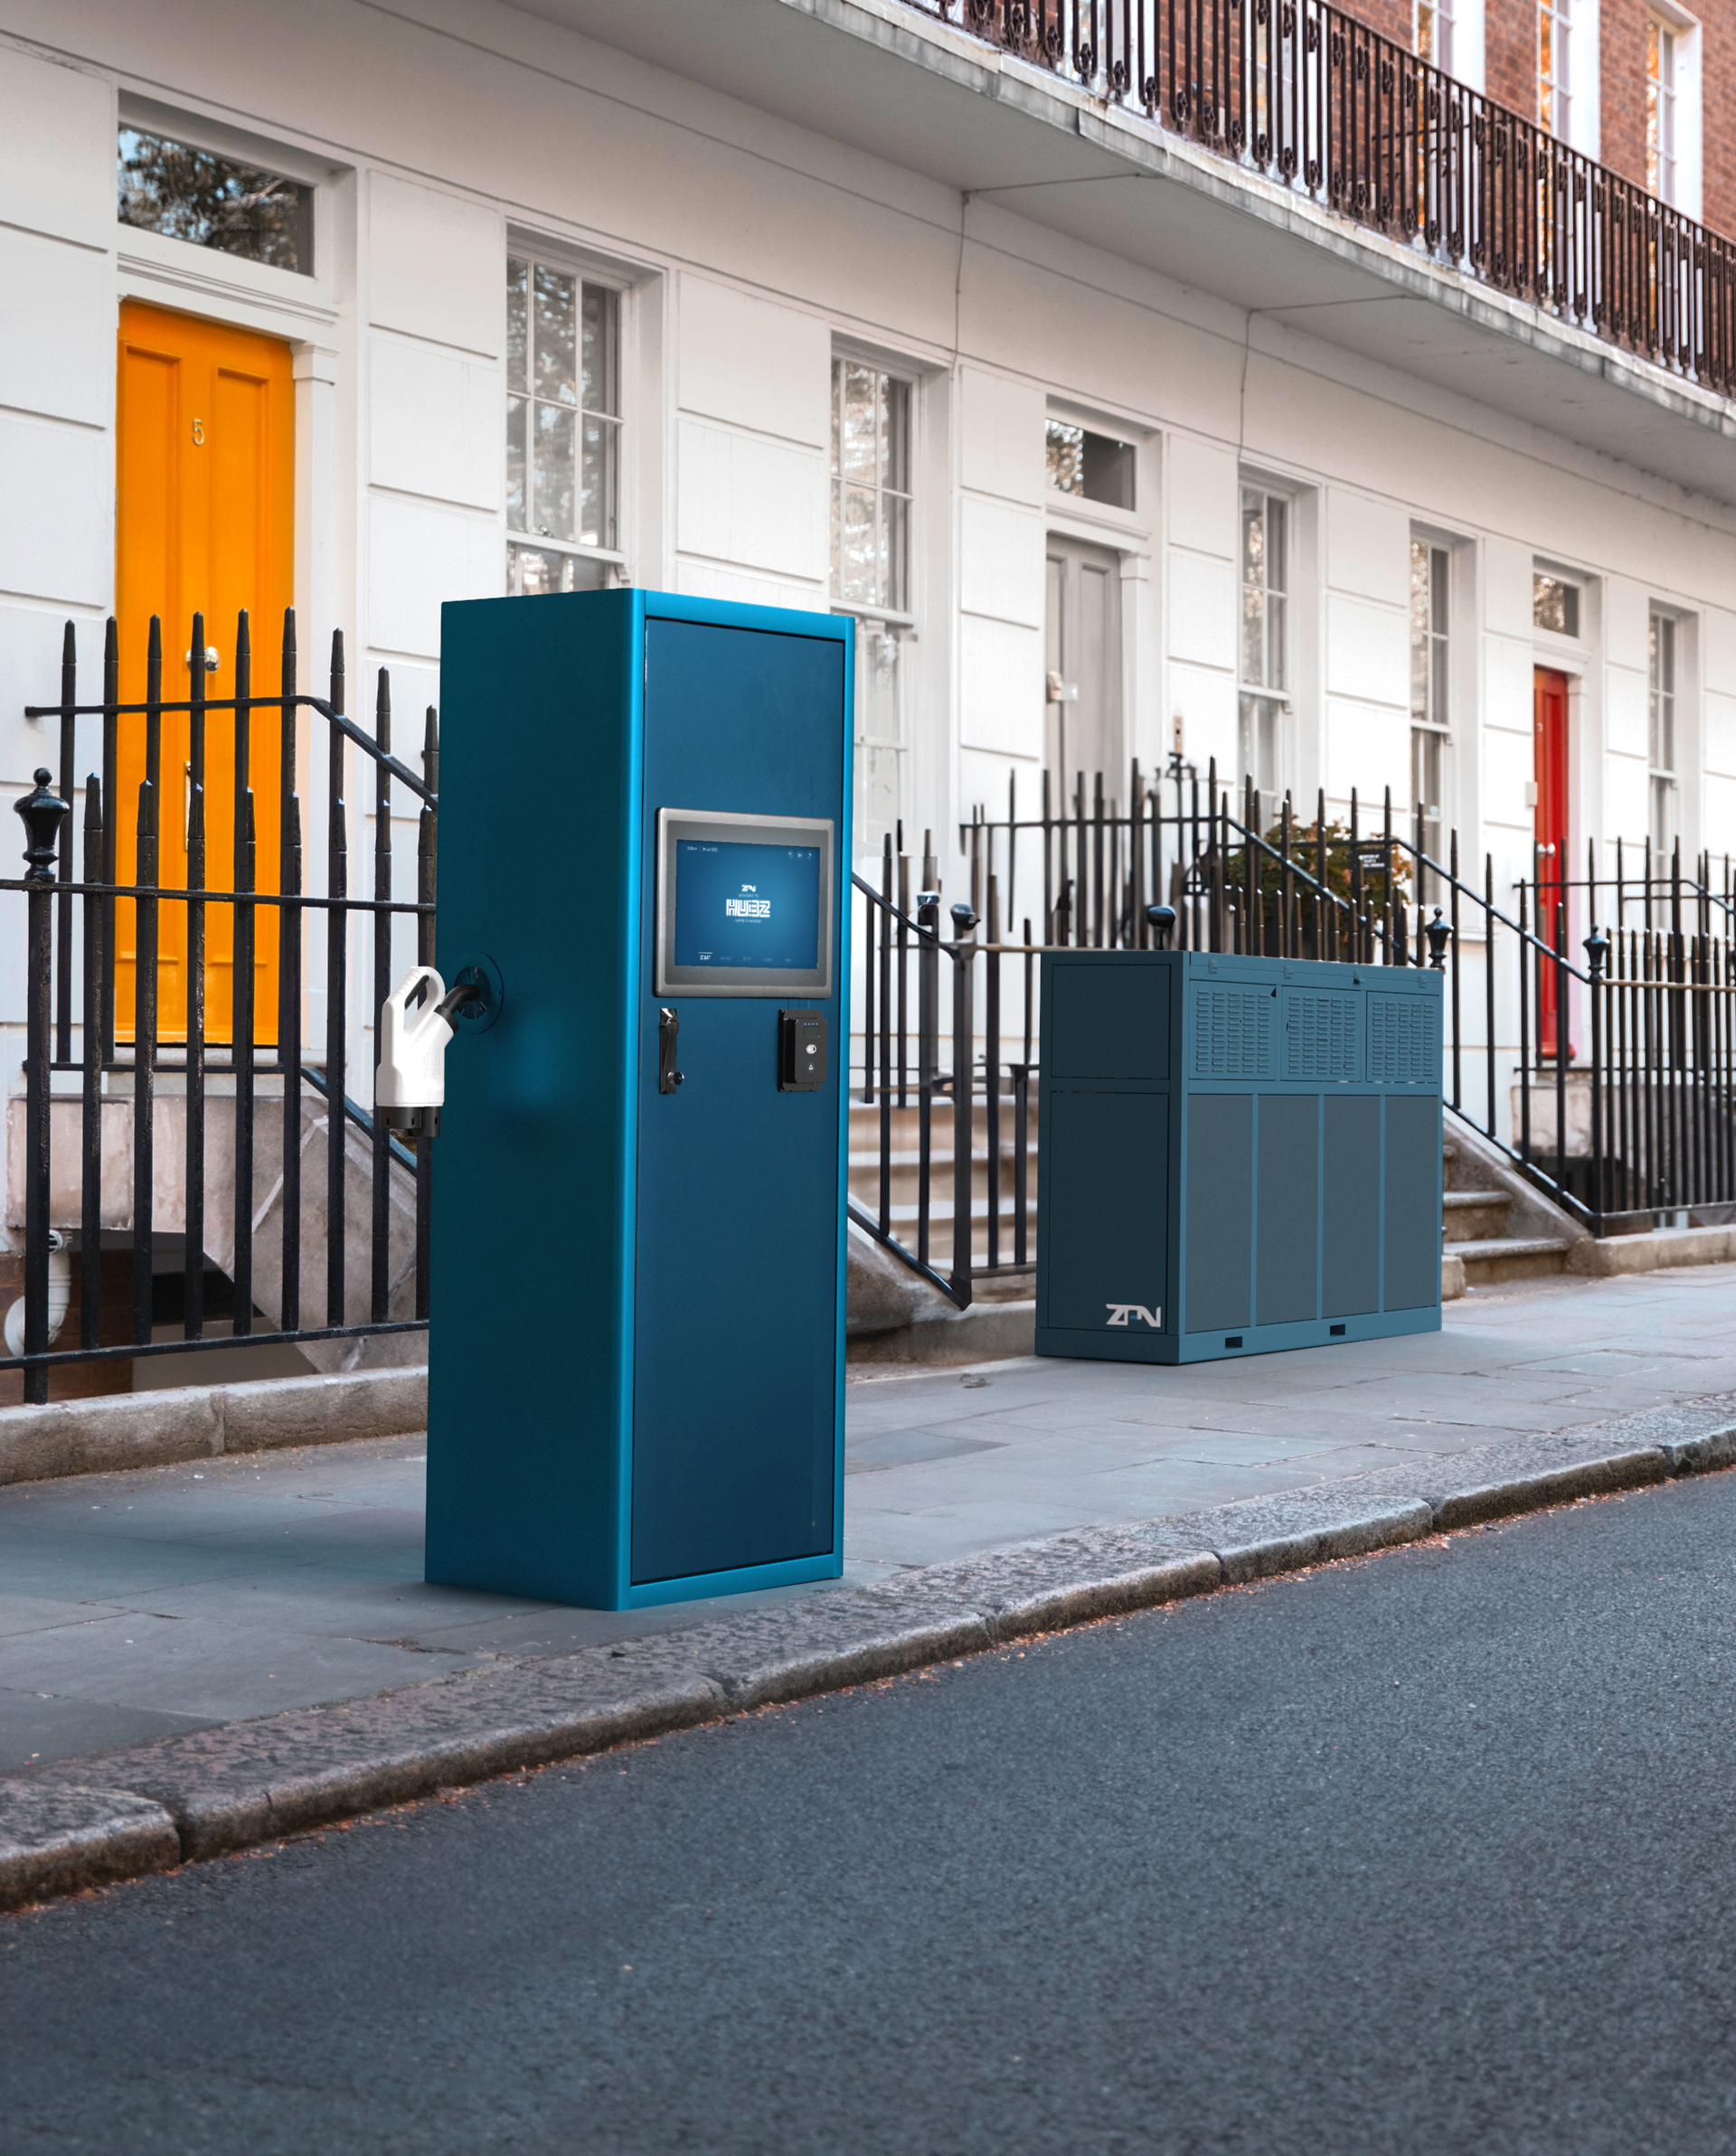 A HUBZ charger and Battery storage container on a London street in Britain in front of a series of townhouses.